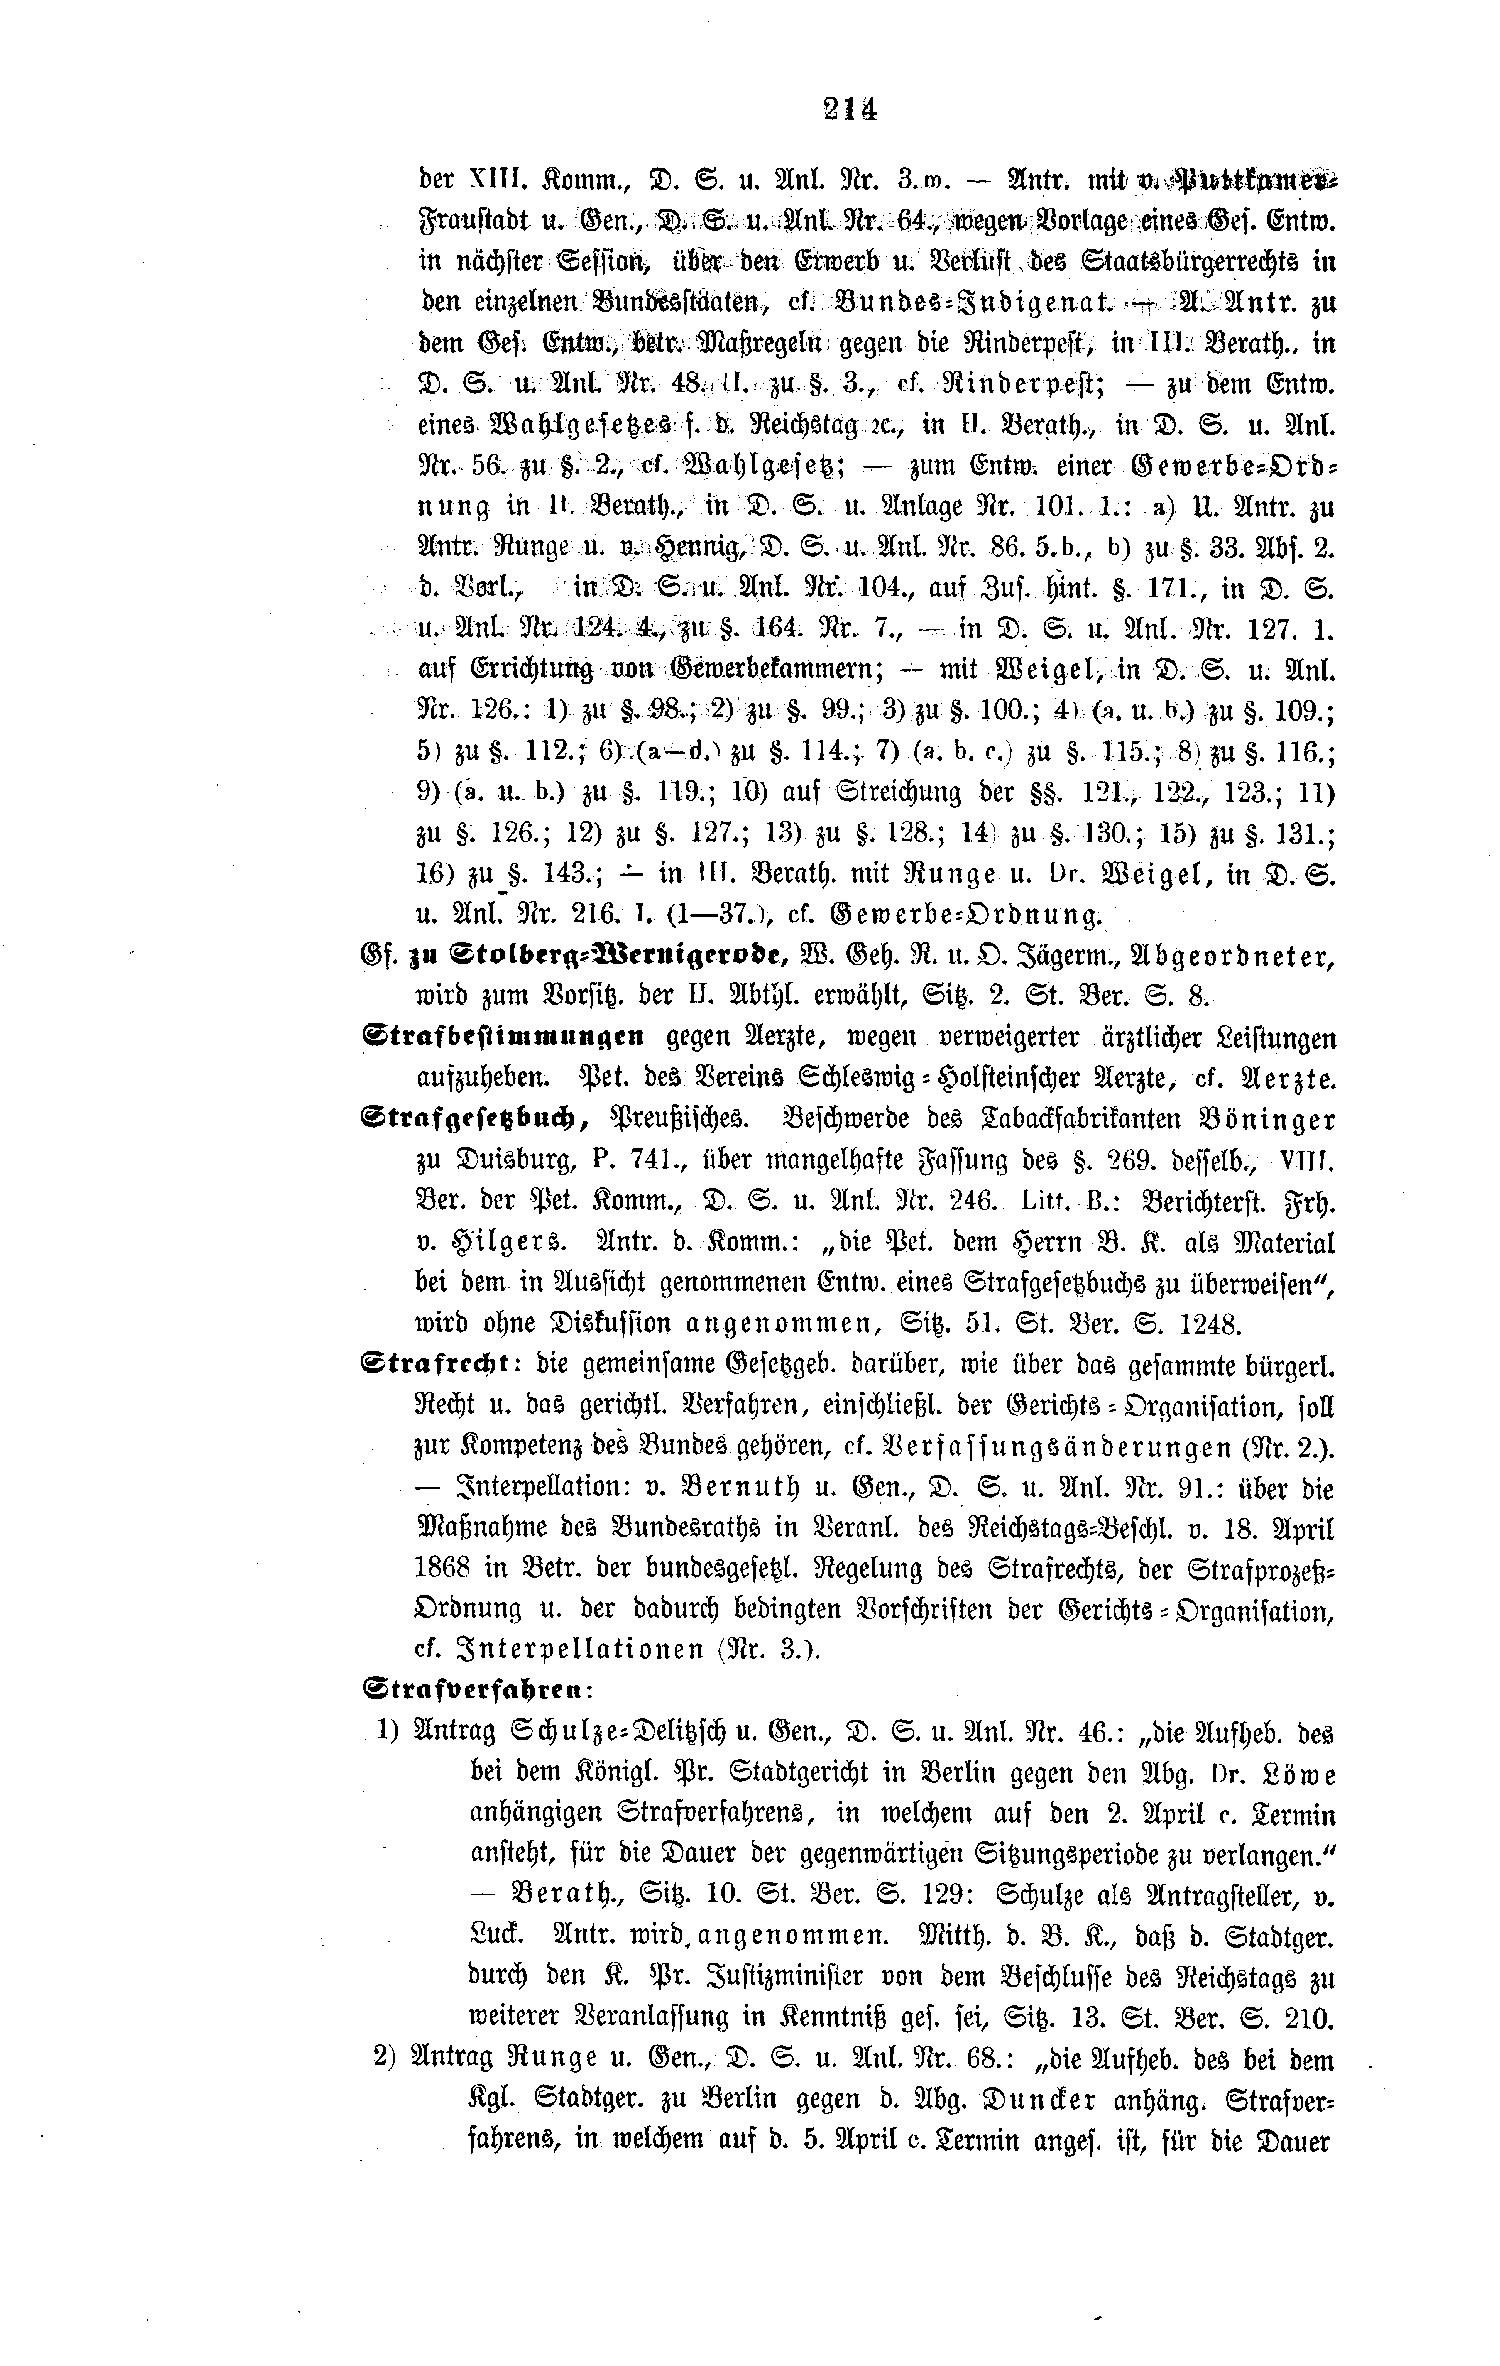 Scan of page 214